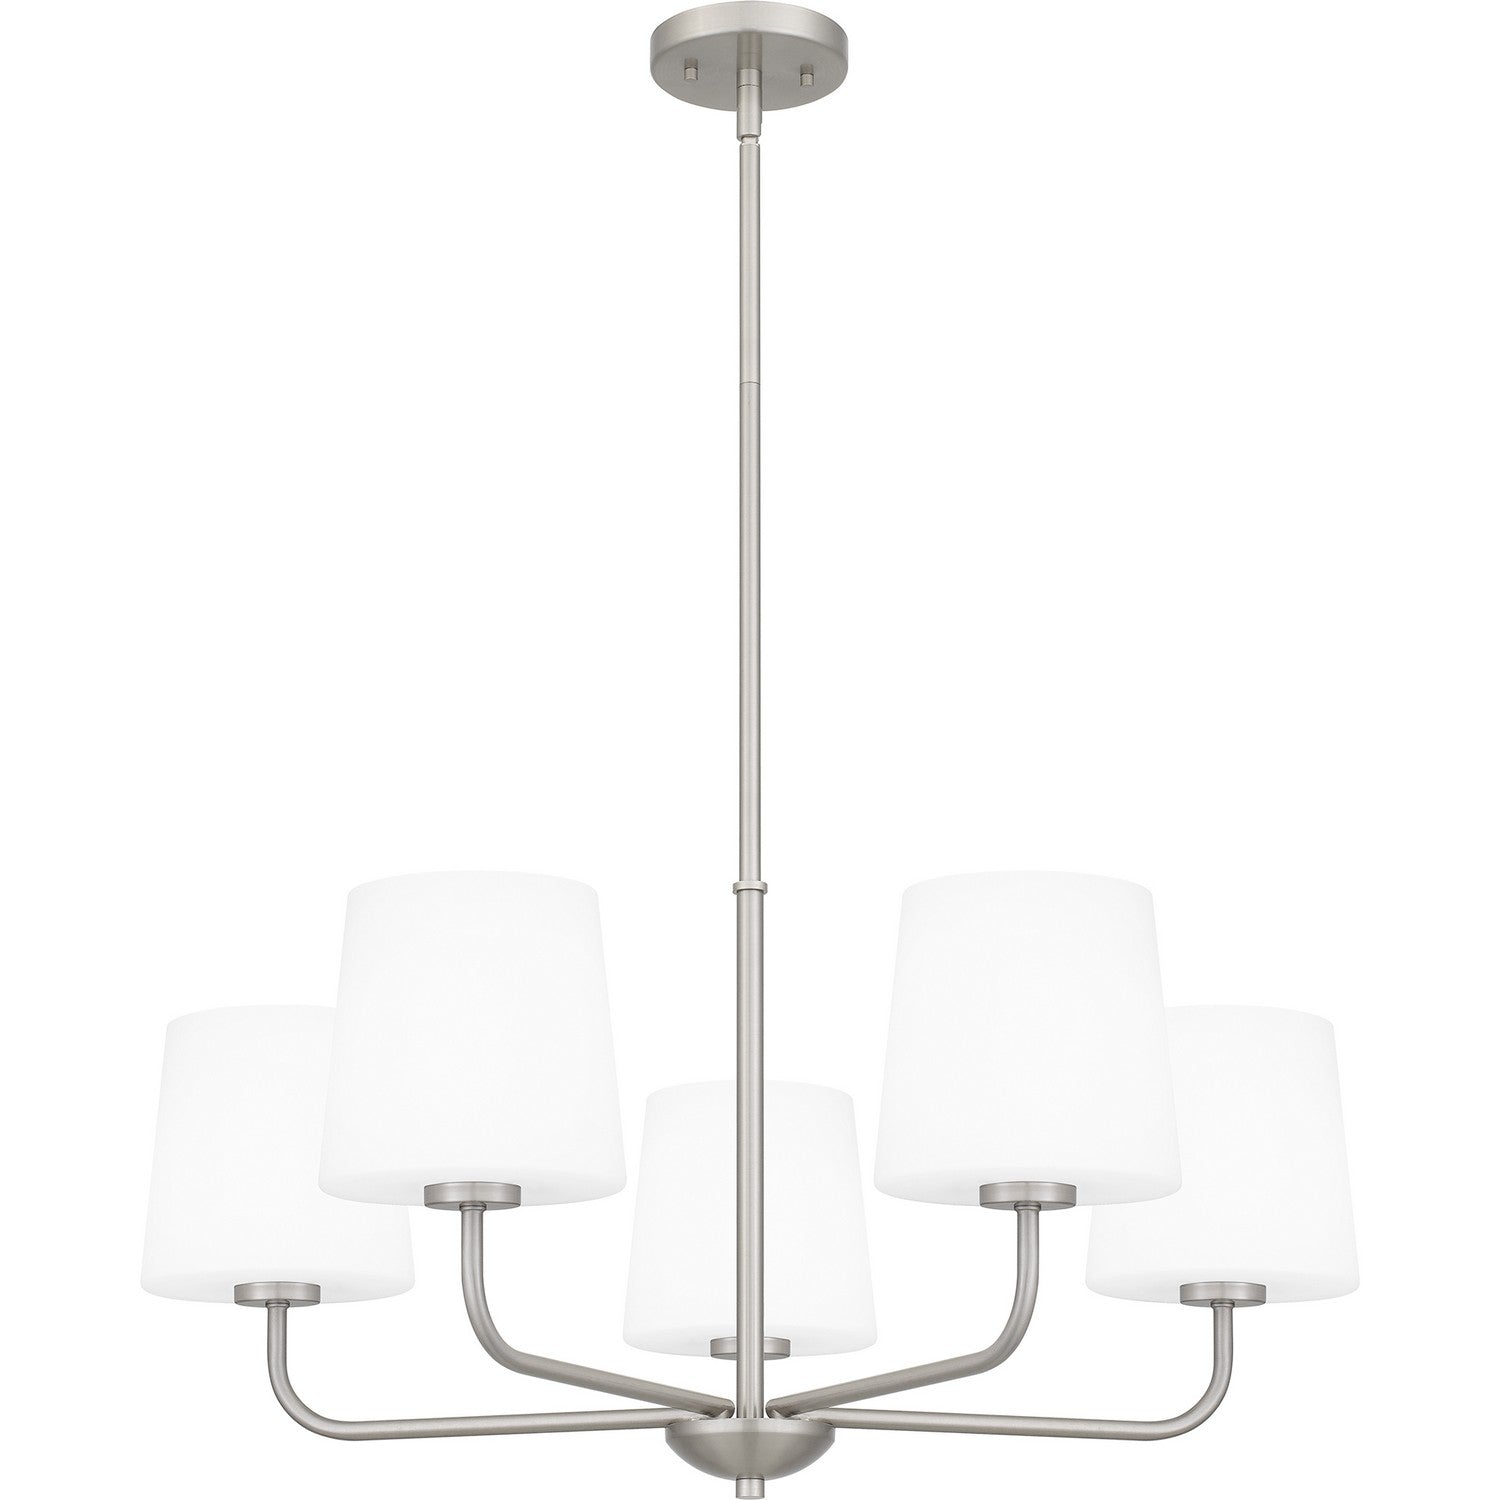 Gallagher Five Light Chandelier by Quoizel in Brushed Nickel Finish (GGR5028BN)